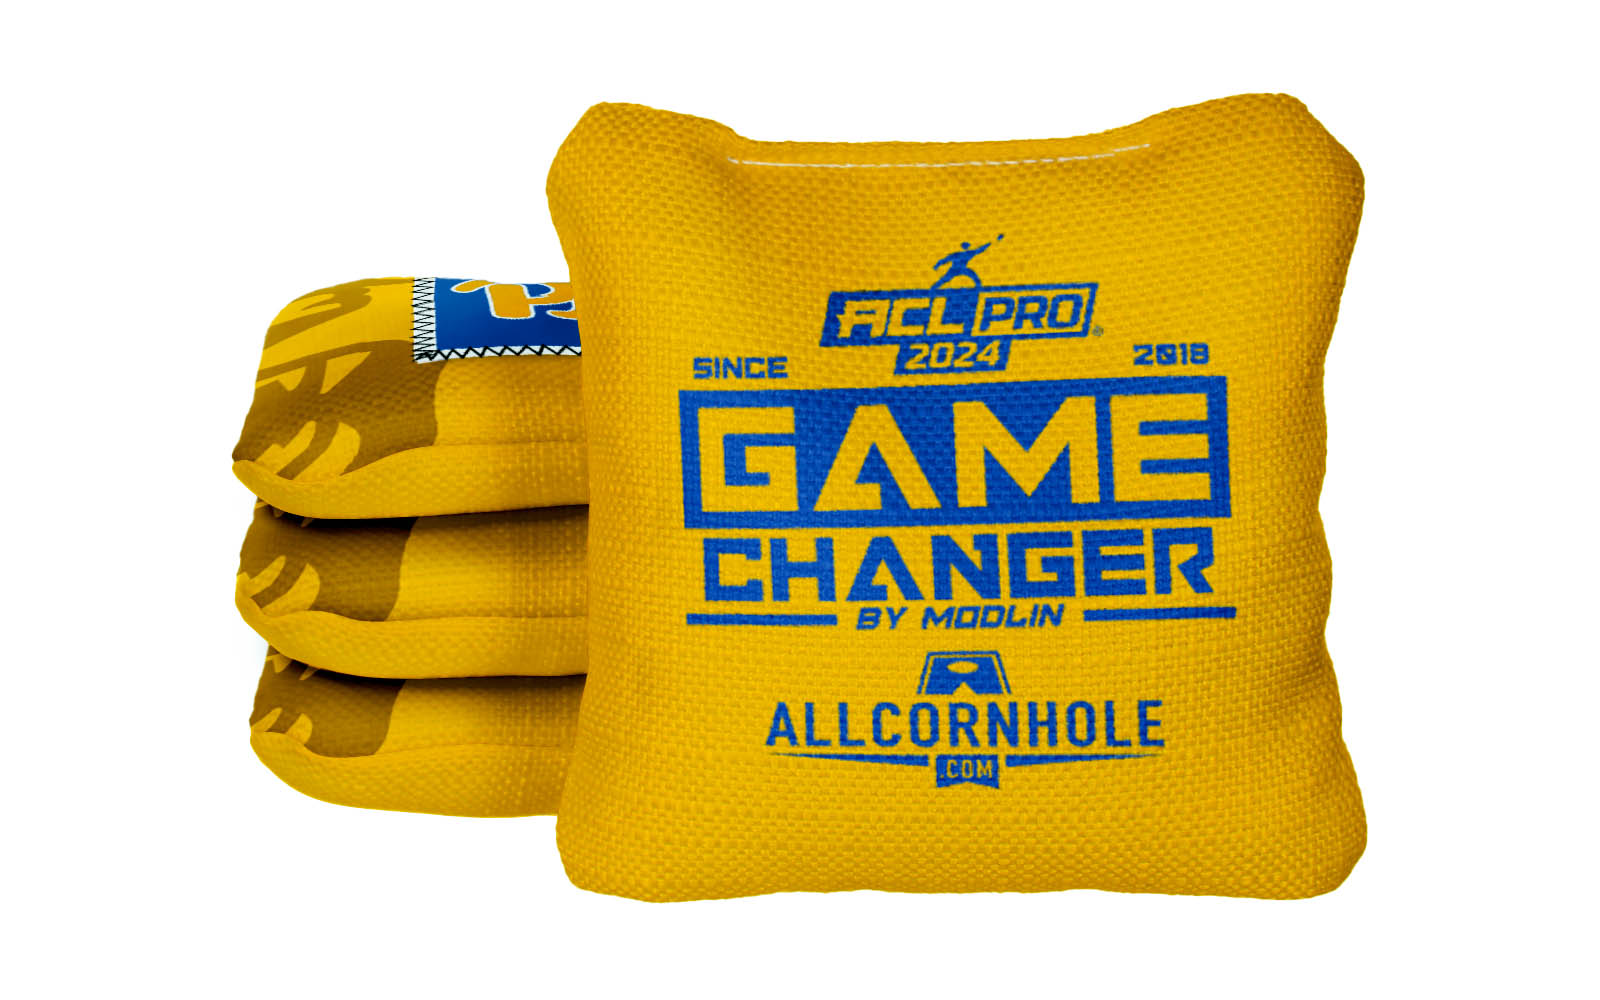 Officially Licensed Collegiate Cornhole Bags - AllCornhole Game Changers - Set of 4 - University of Pittsburgh